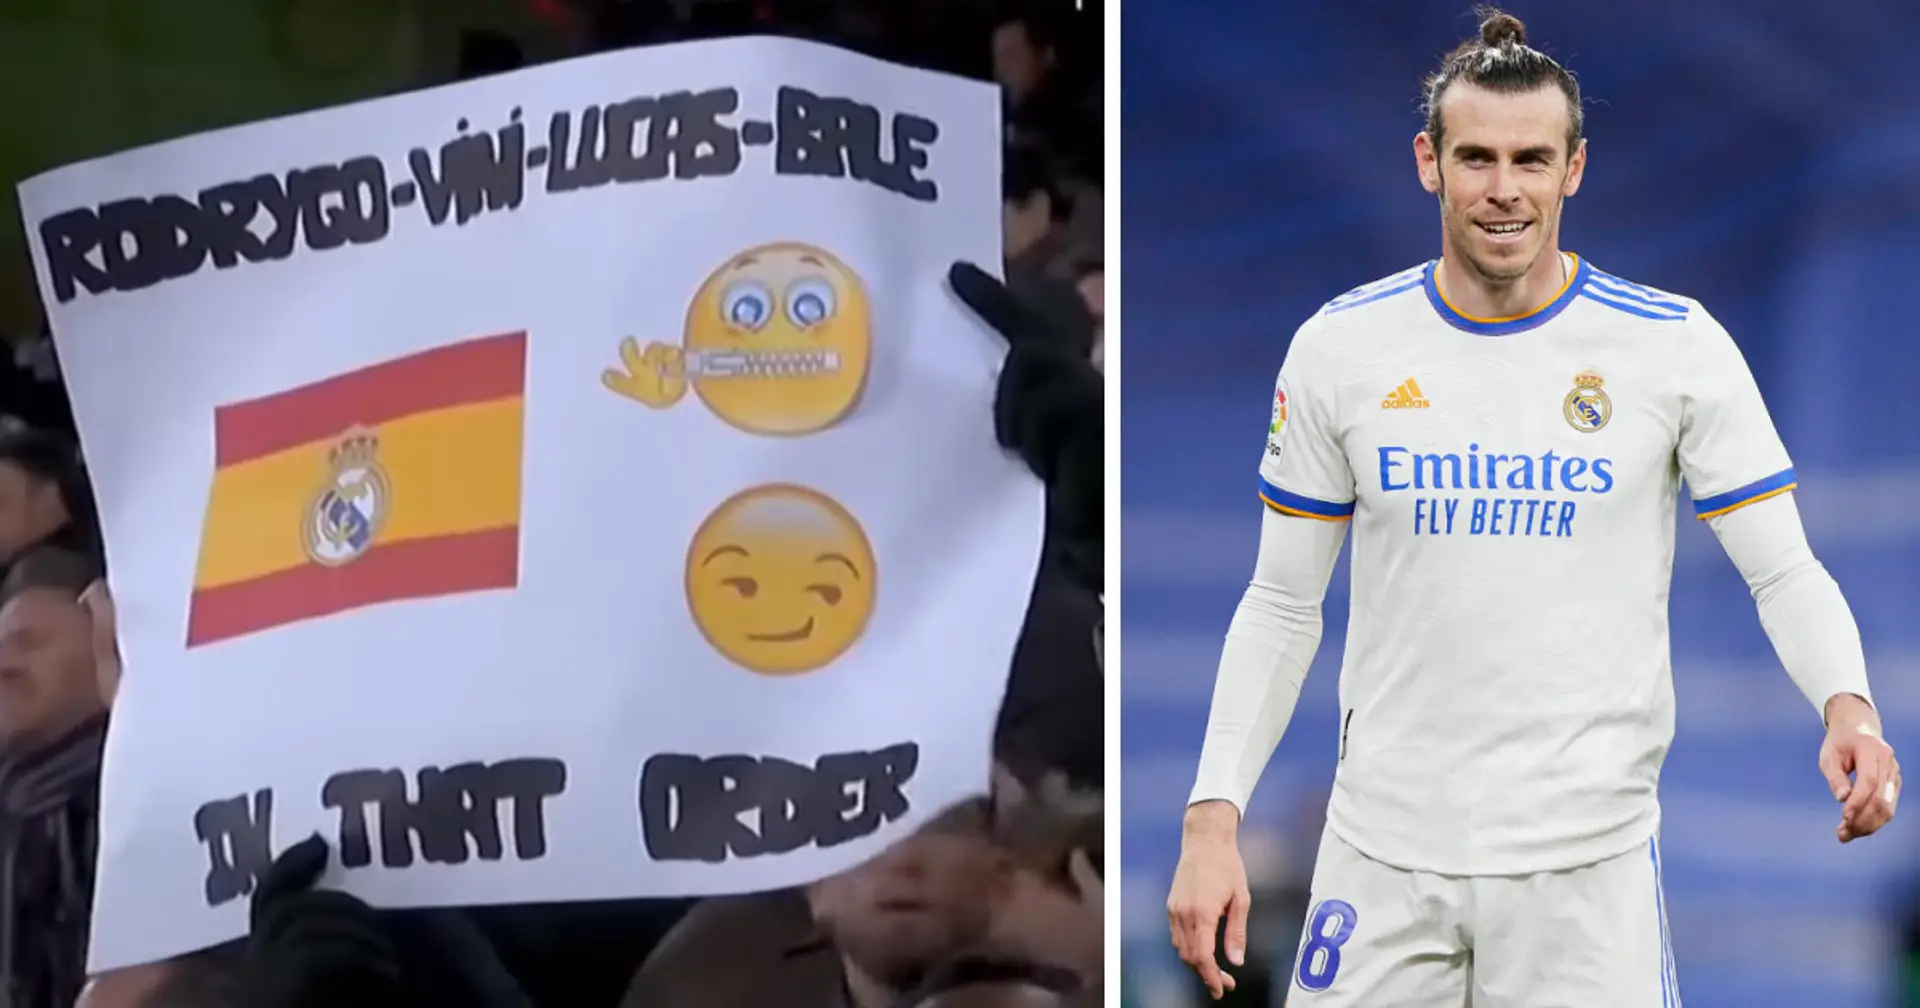 'I don't have any regrets': Gareth Bale reflects on his time at Real Madrid including own fans booing him